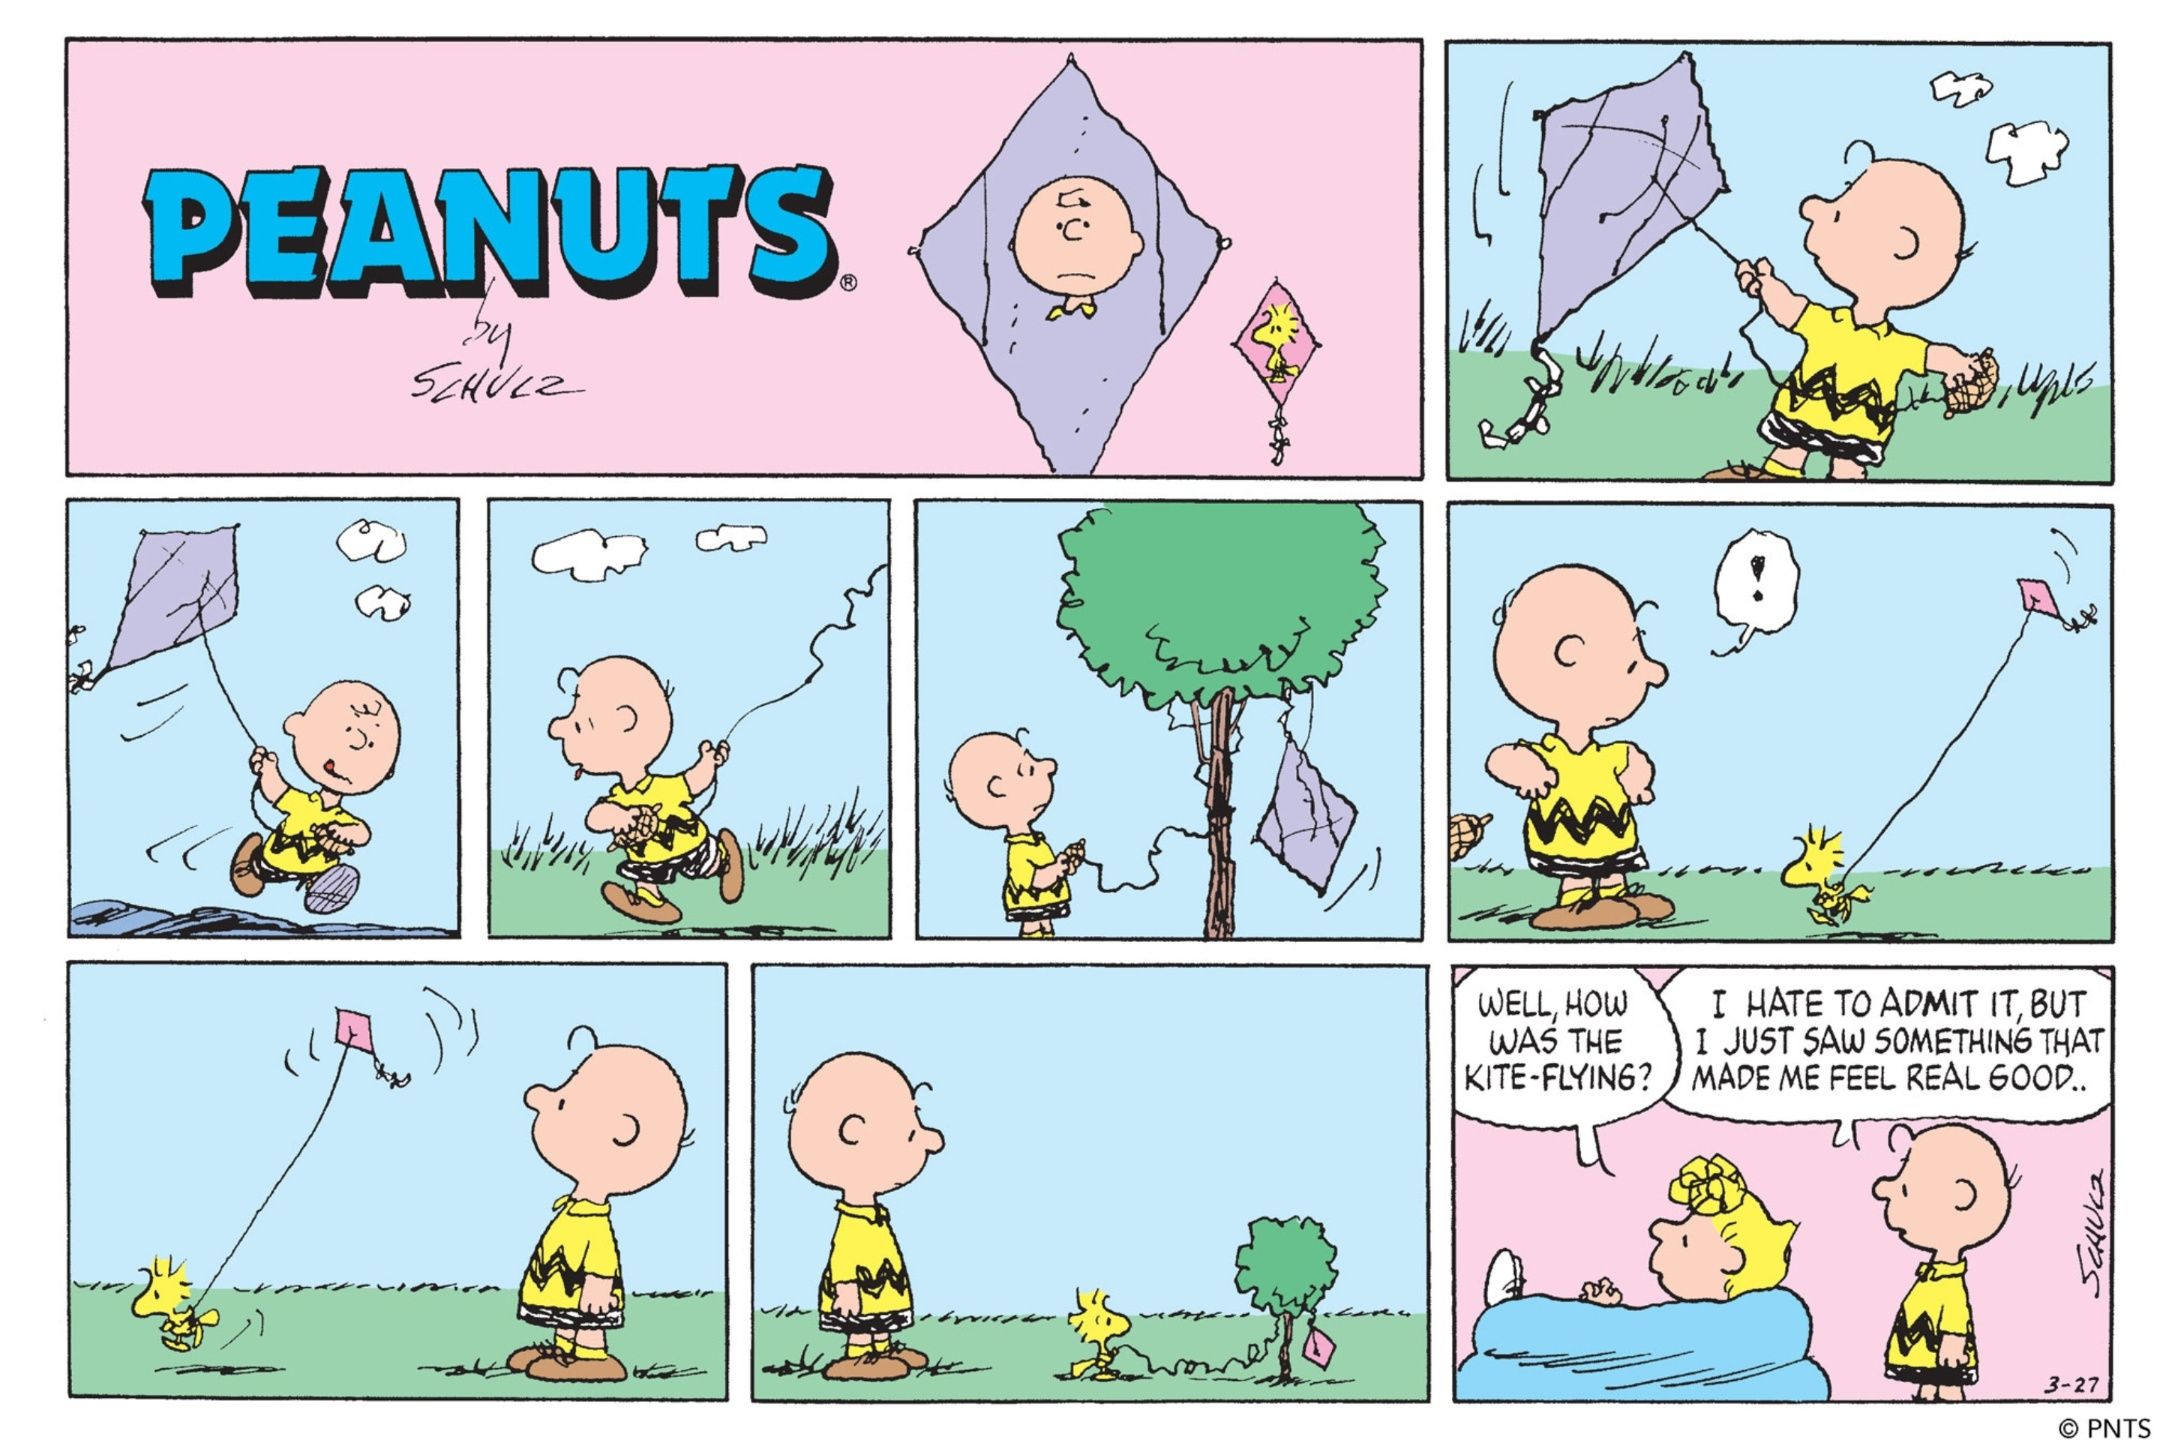 Charlie Brown, Sally, and Woodstock with a Kite Eating Tree in Peanuts.